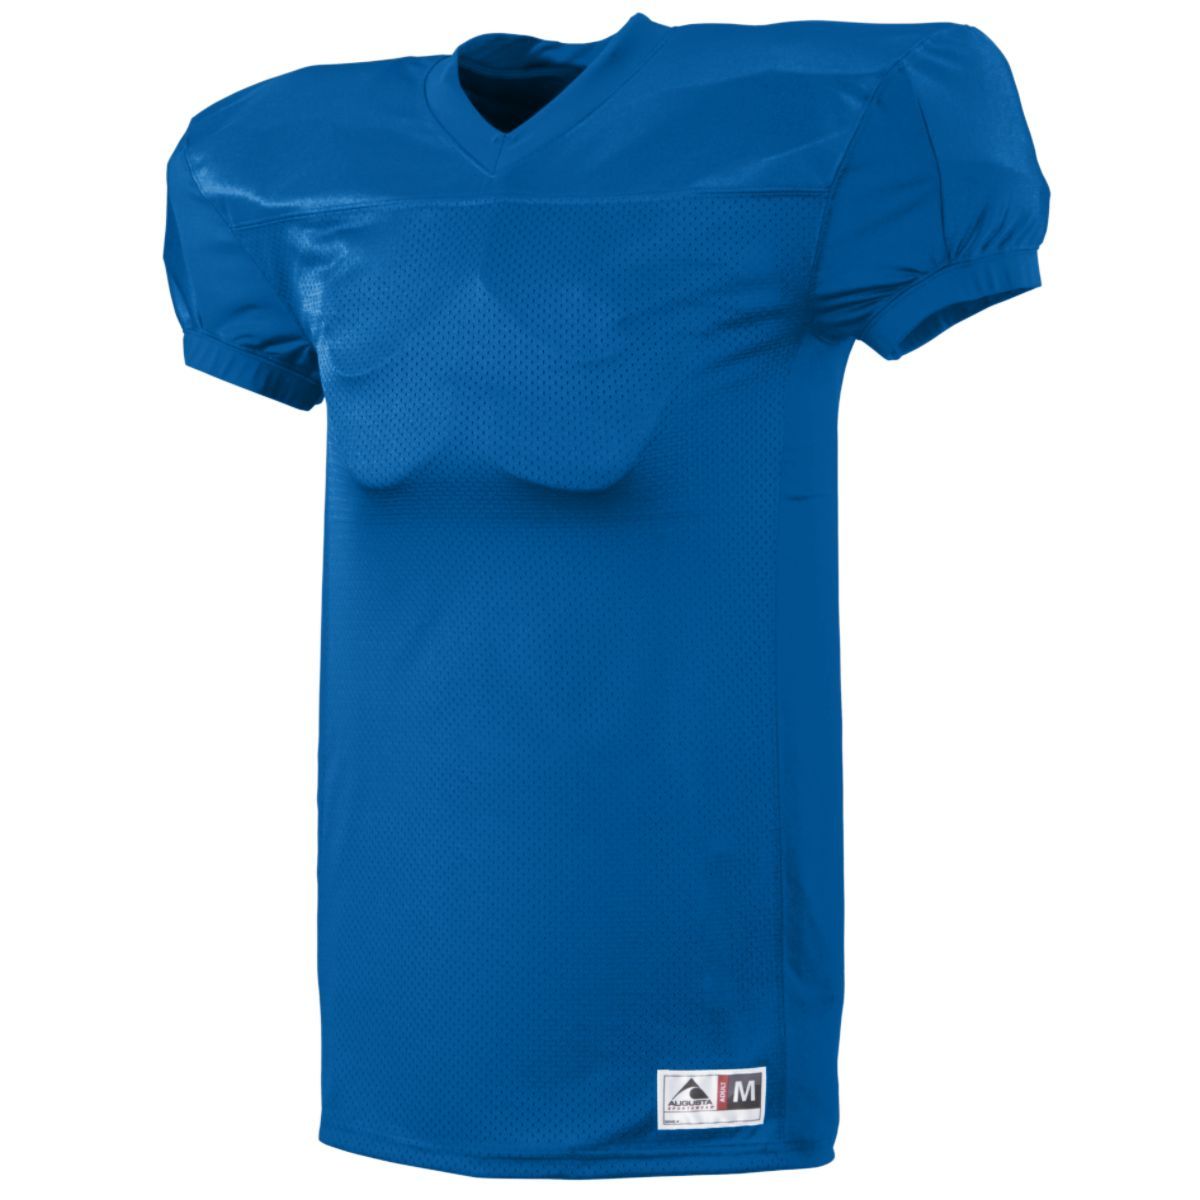 Augusta Sportswear Scrambler Jersey in Royal  -Part of the Adult, Adult-Jersey, Augusta-Products, Football, Shirts, All-Sports, All-Sports-1 product lines at KanaleyCreations.com